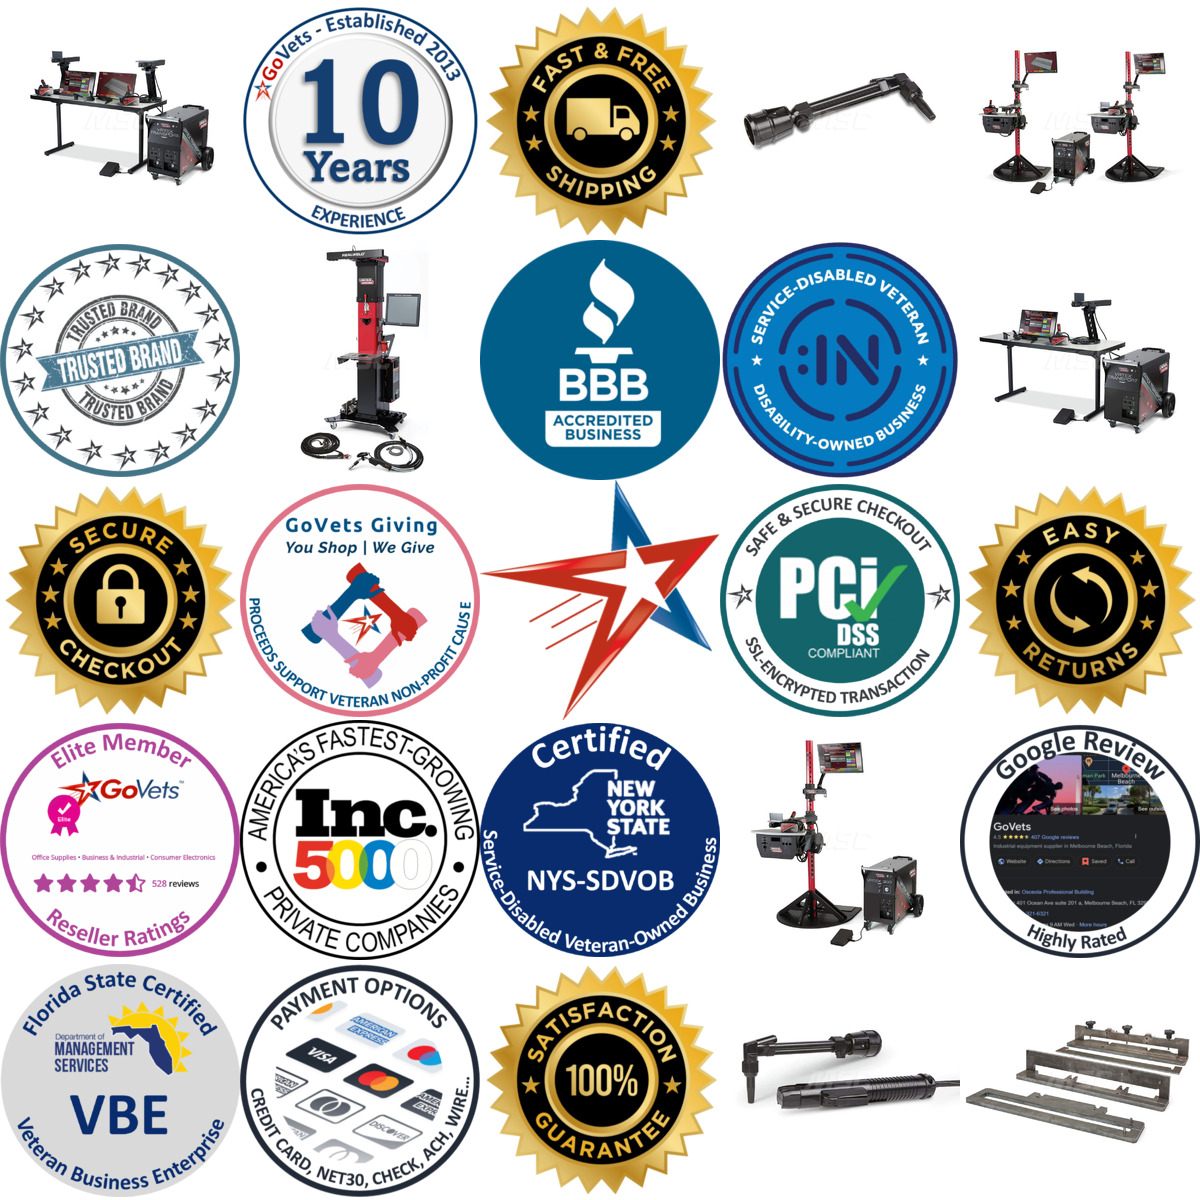 A selection of Welding Training Equipment products on GoVets